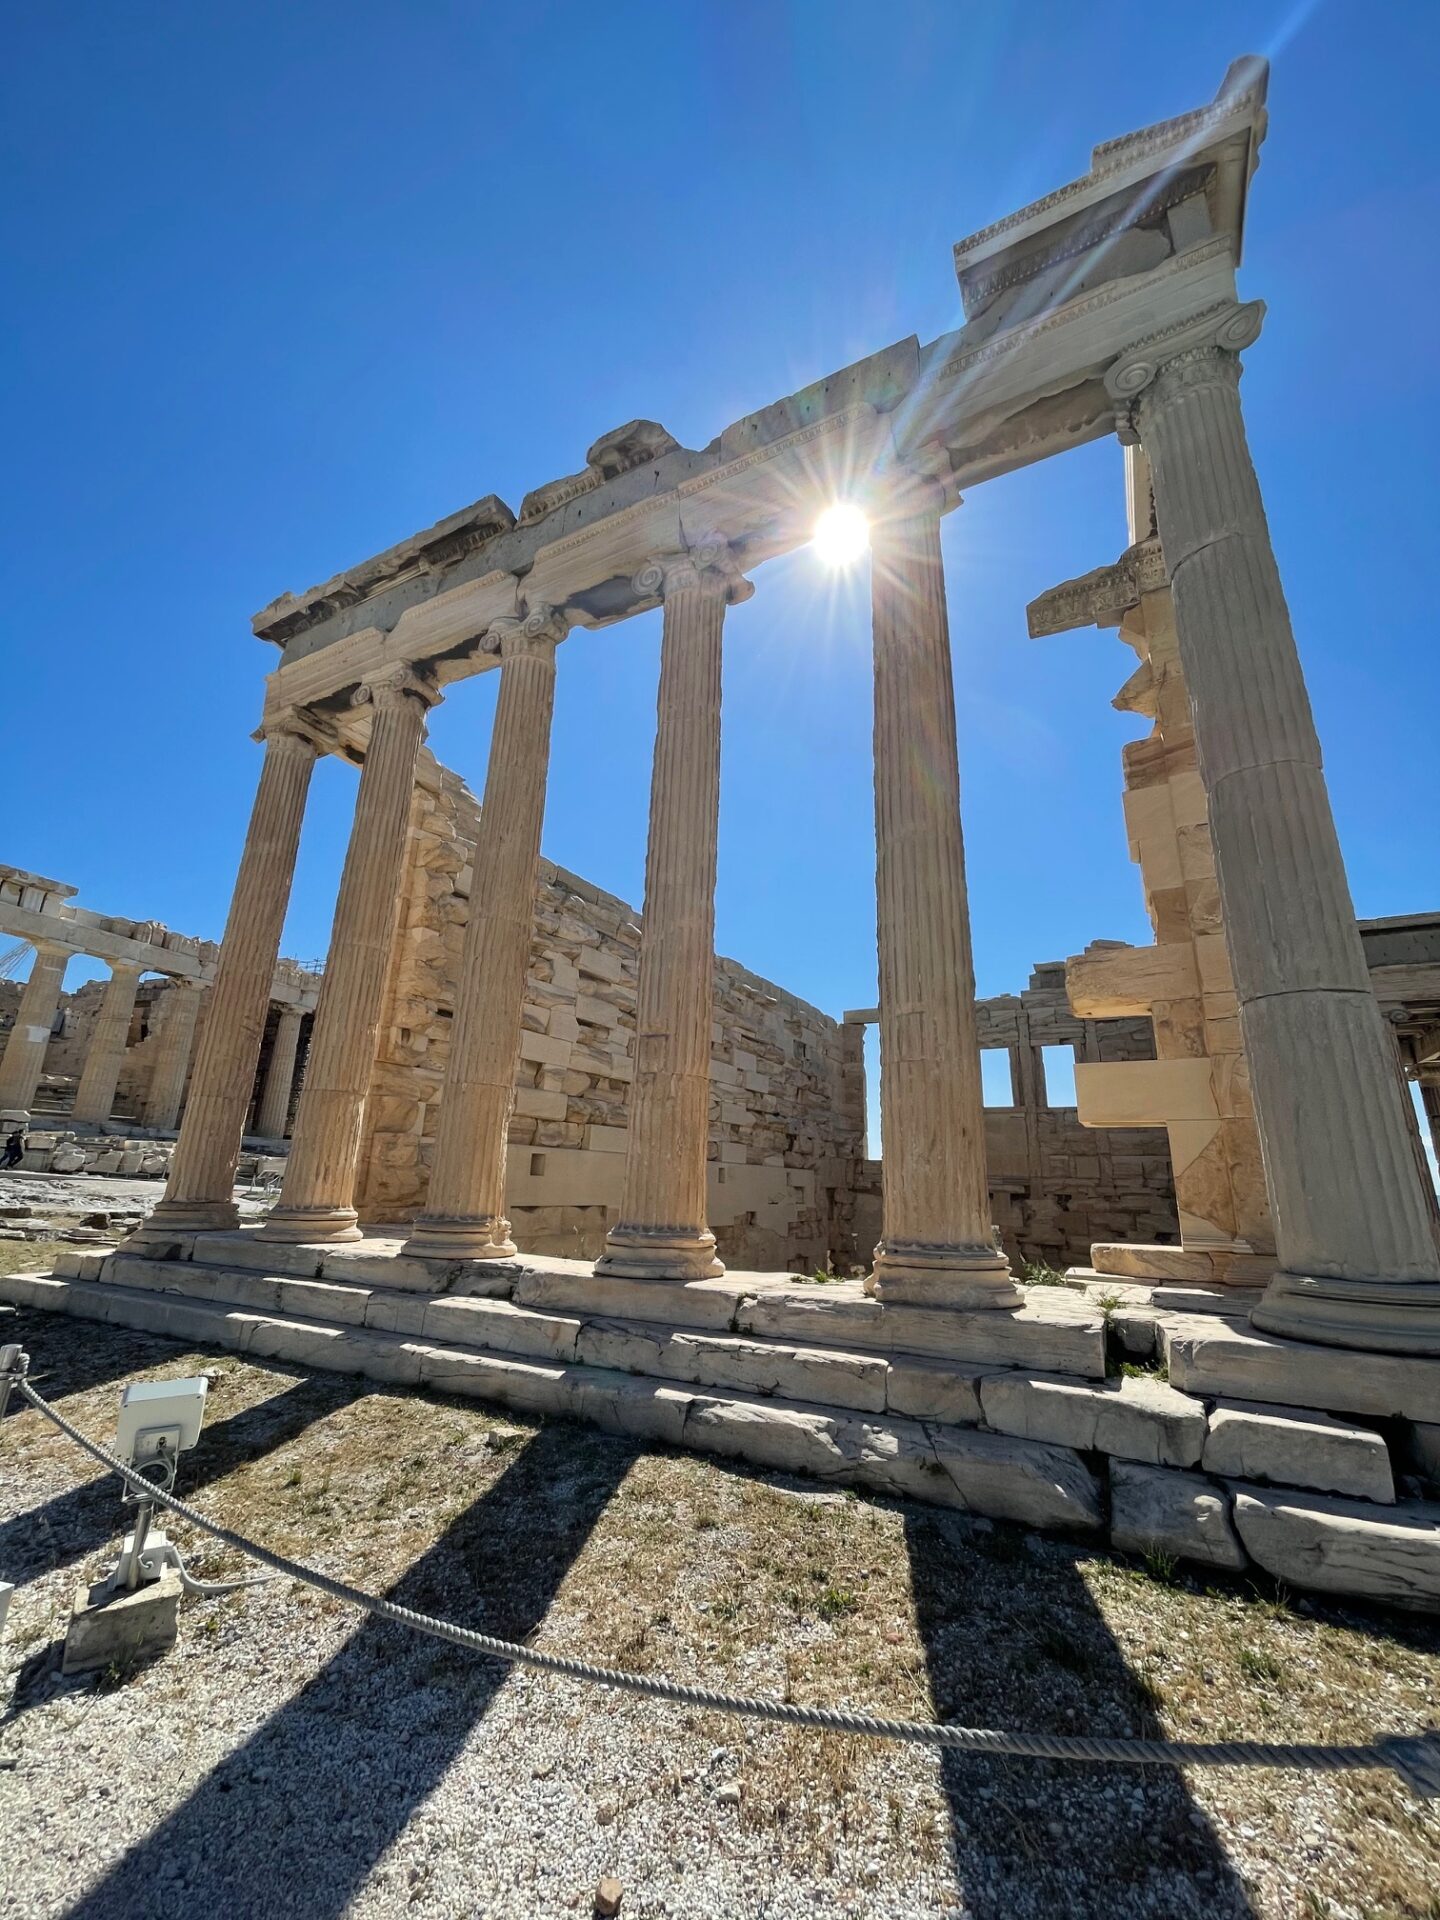 ATHENS: THINGS TO KNOW AND DO IN THE GREEK CAPITAL